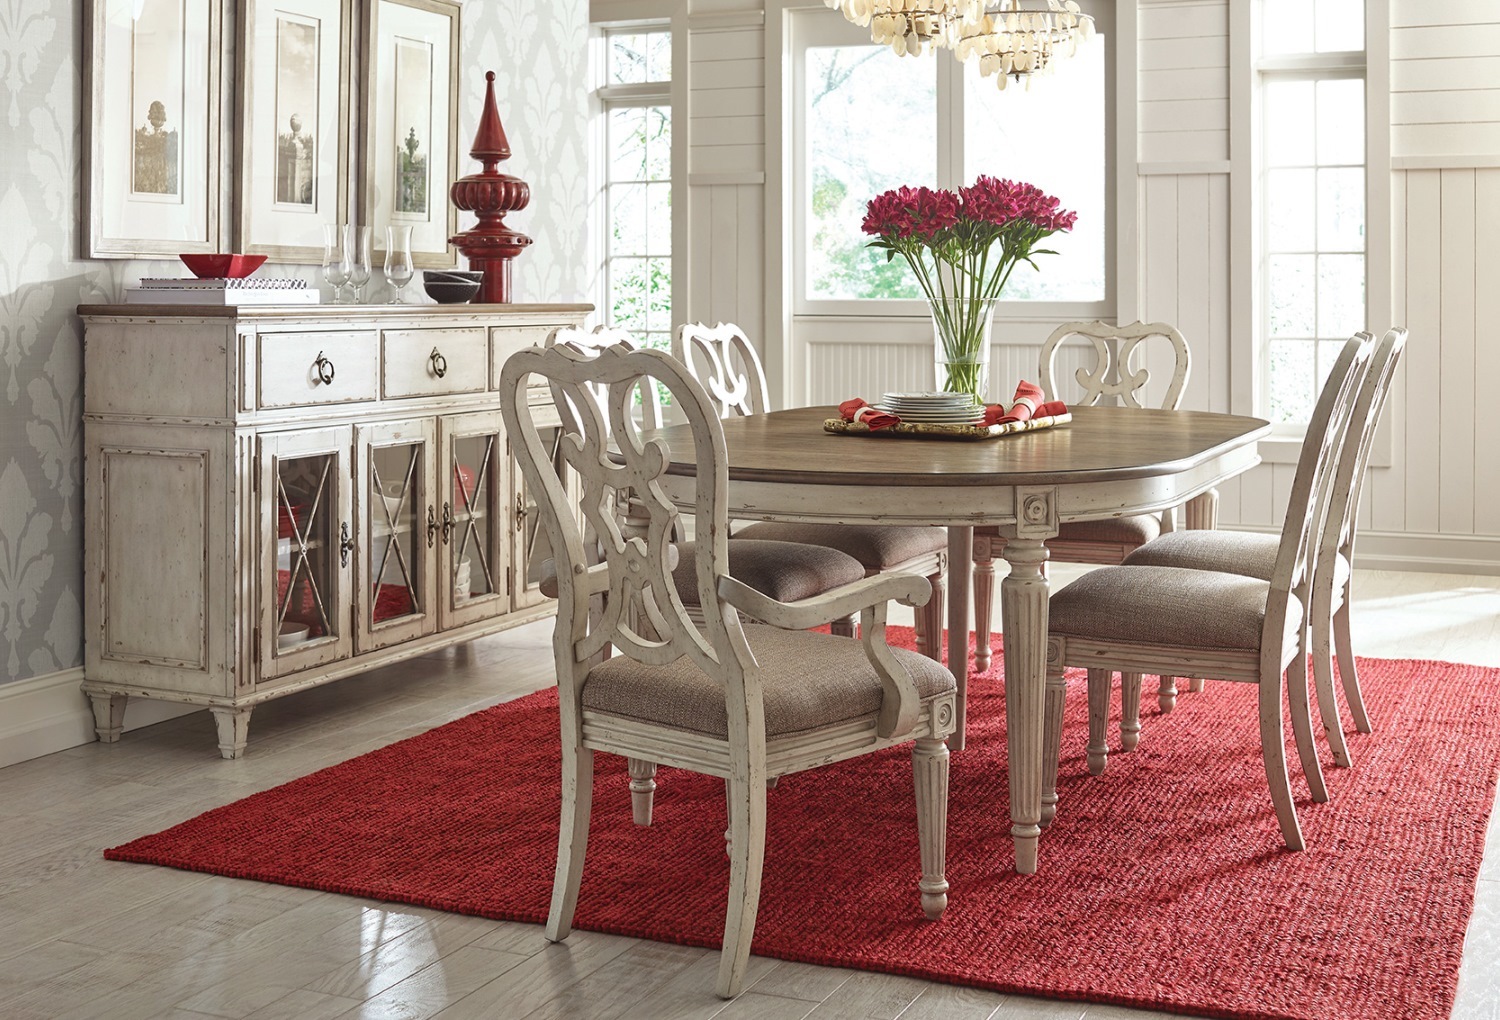 Southbury Bedroom and Dining Room Furniture